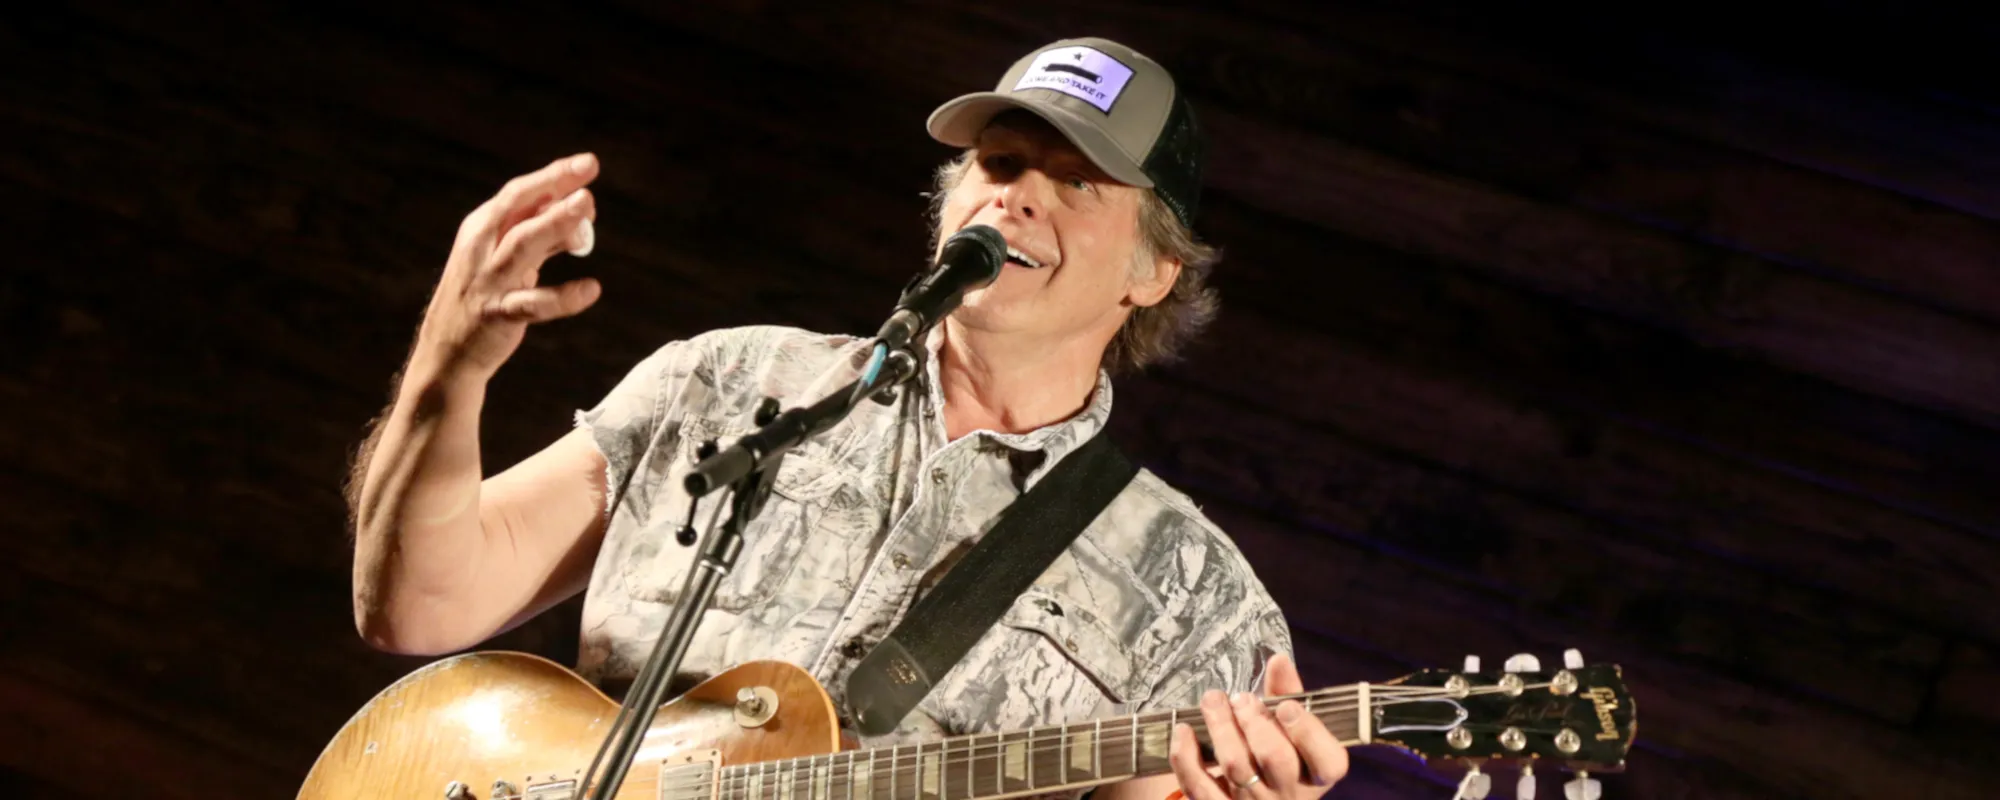 Meaning Behind the Lusty Song “Cat Scratch Fever” by Ted Nugent